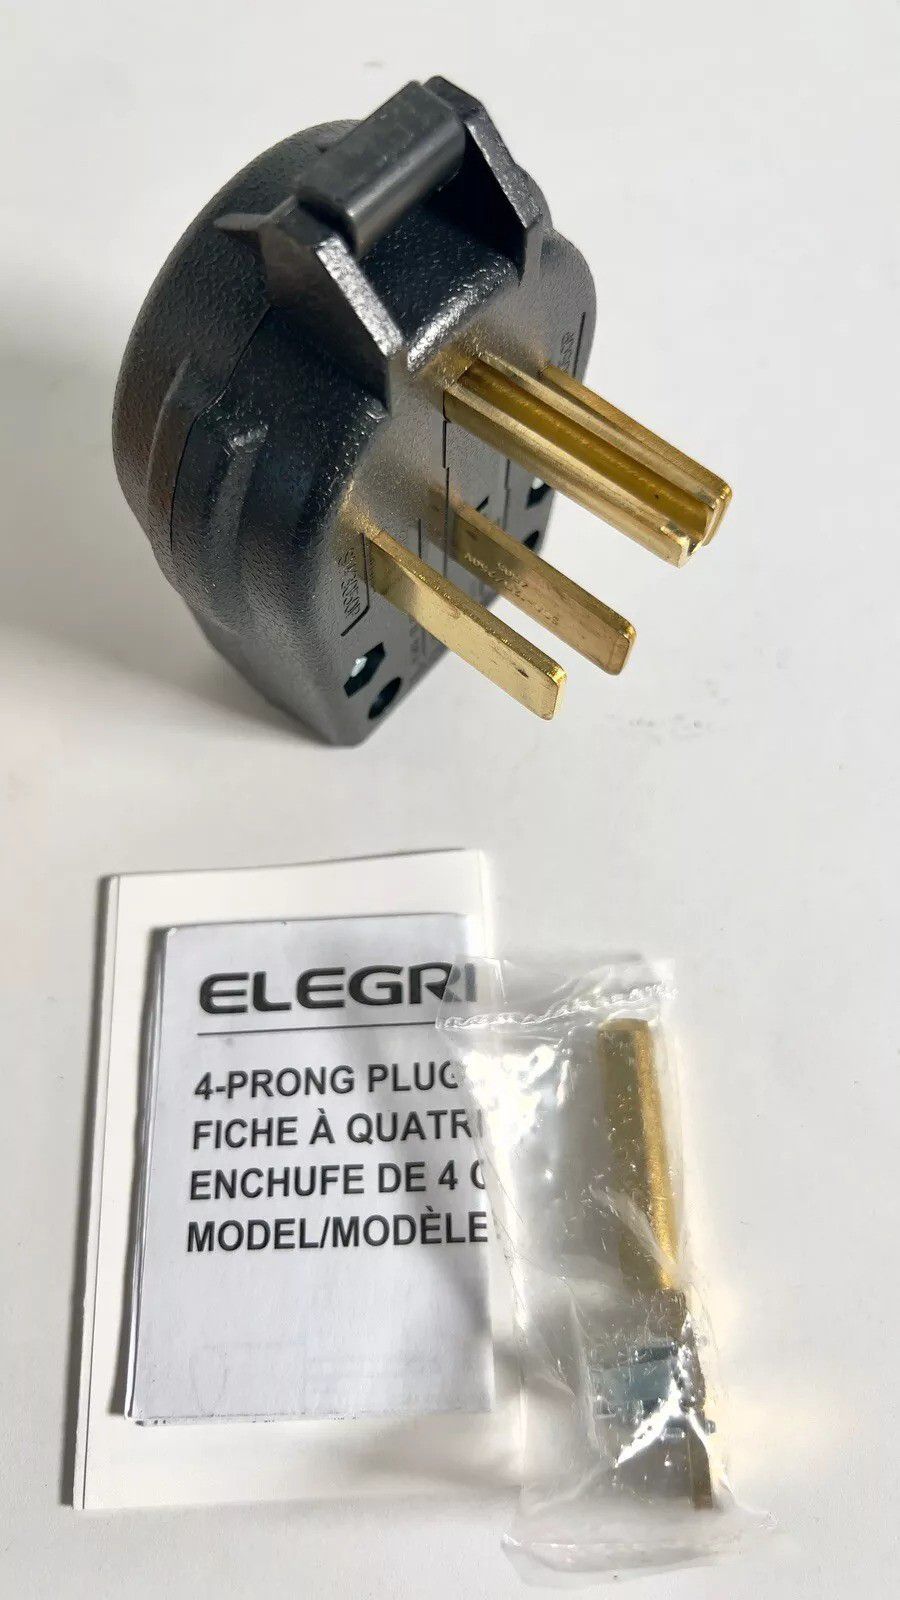 ELEGRP 30 Amp/50 Amp 125/250-Volt 3-Pole/4-Wire Grounded Straight Blade Angle